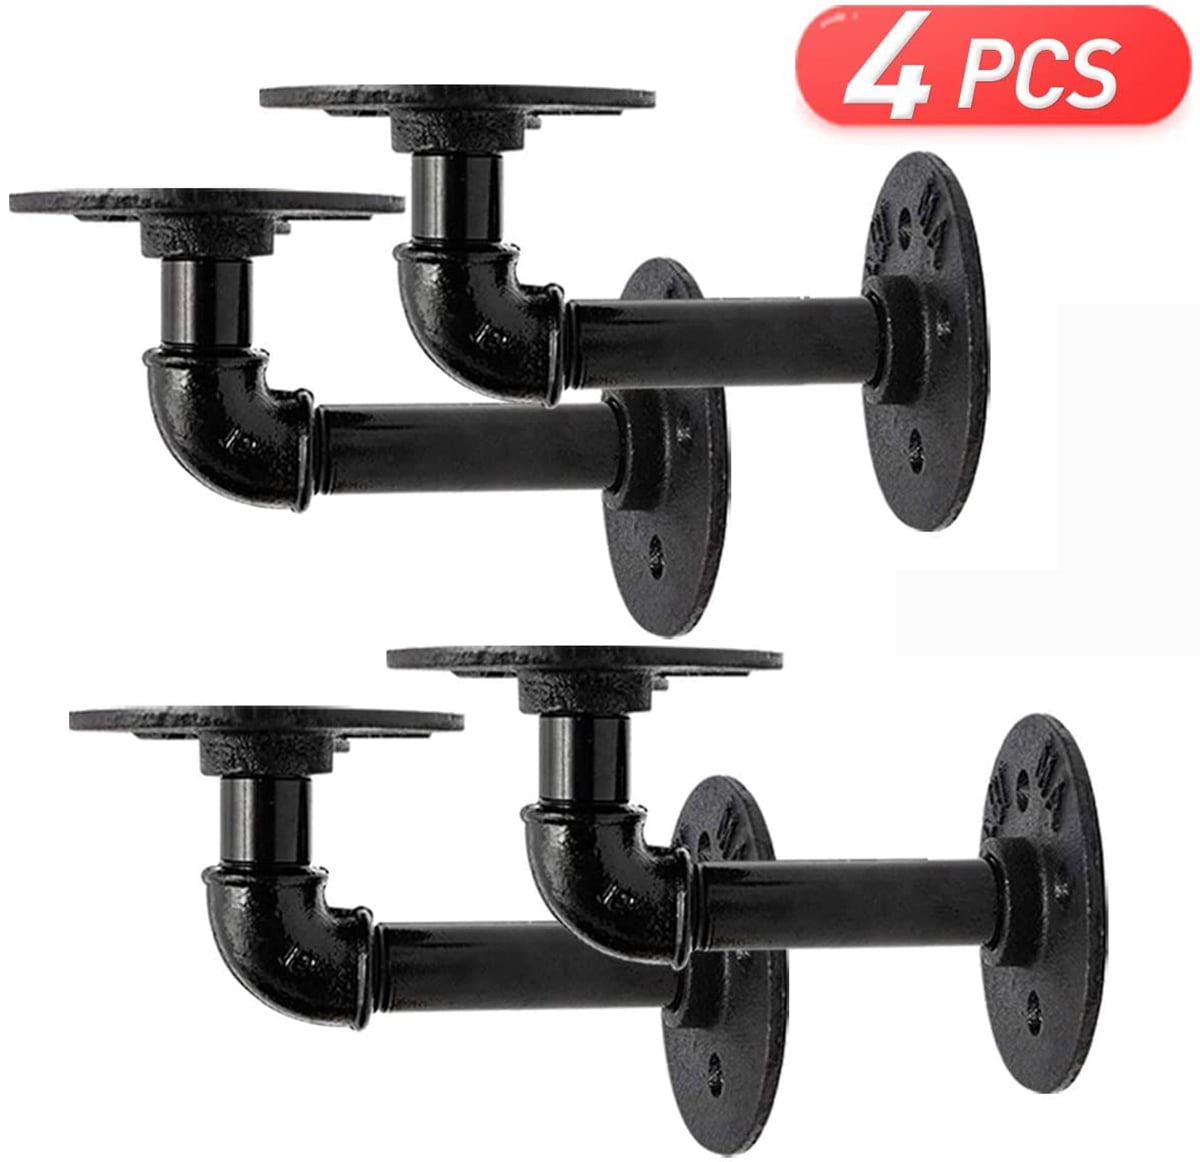 Wall Mounted DIY Bracket Garment Rack Hardware Rustic Floating Shelf Brackets with Iron Fittings Industrial Pipe Shelf Brackets 12 inch Set of 4 Flanges and Pipes for Vintage Furniture Decor